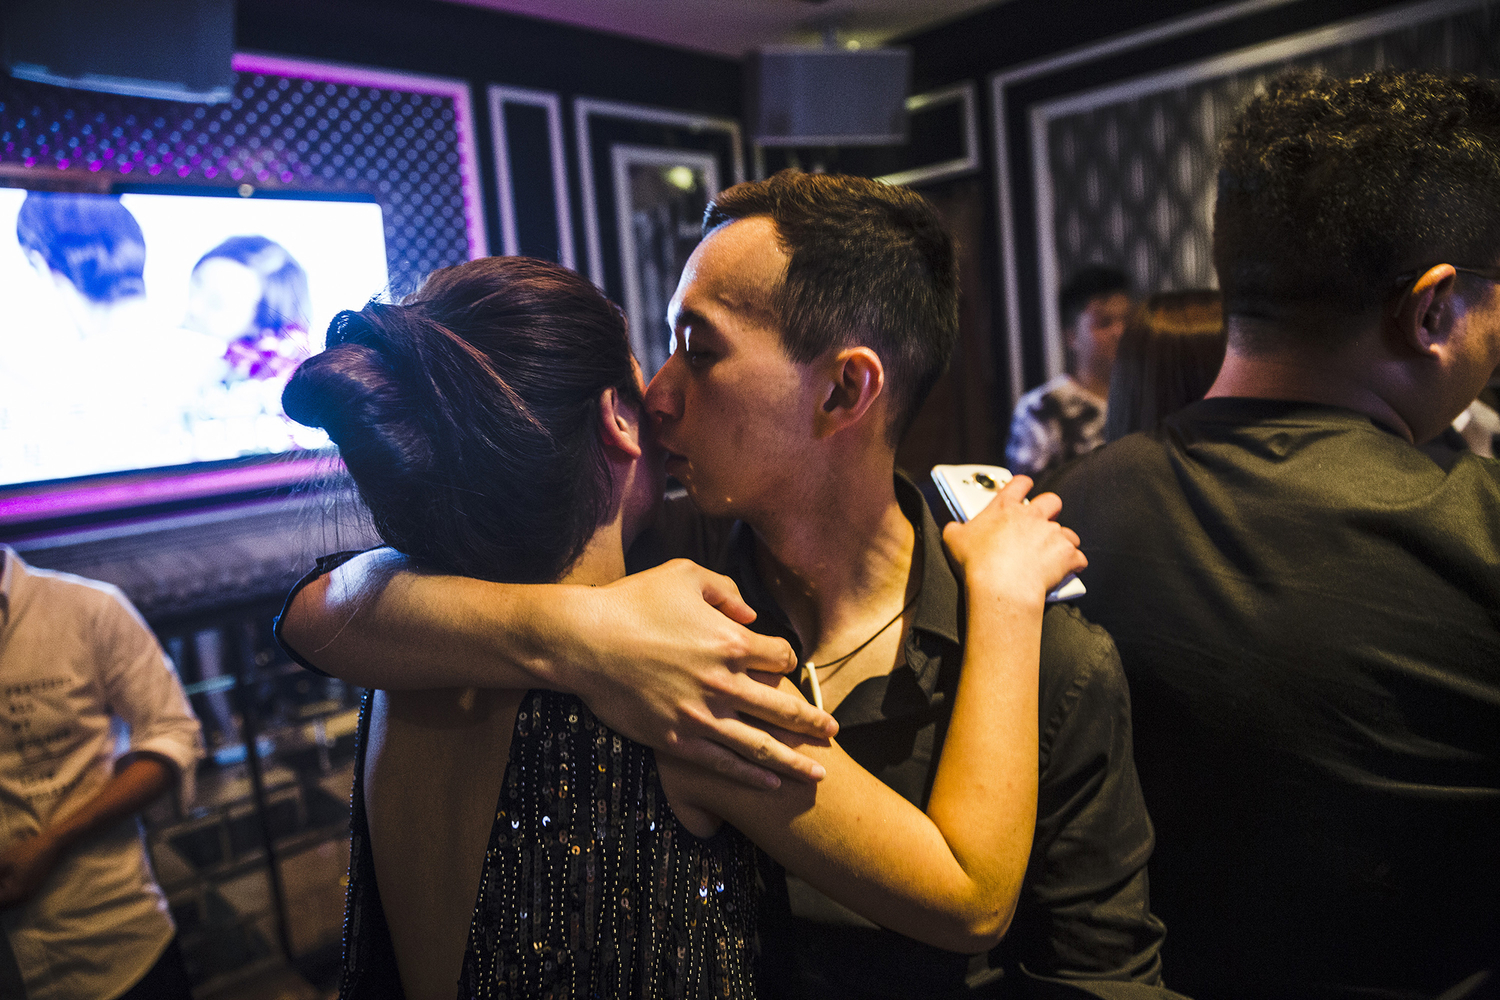 A student kisses a woman he met on the dating app Tantan, at a karaoke parlor, May 18, 2015. The students’ final exam involves inviting at least two women they meet in the real world or on Tantan to a party at a karaoke parlor.